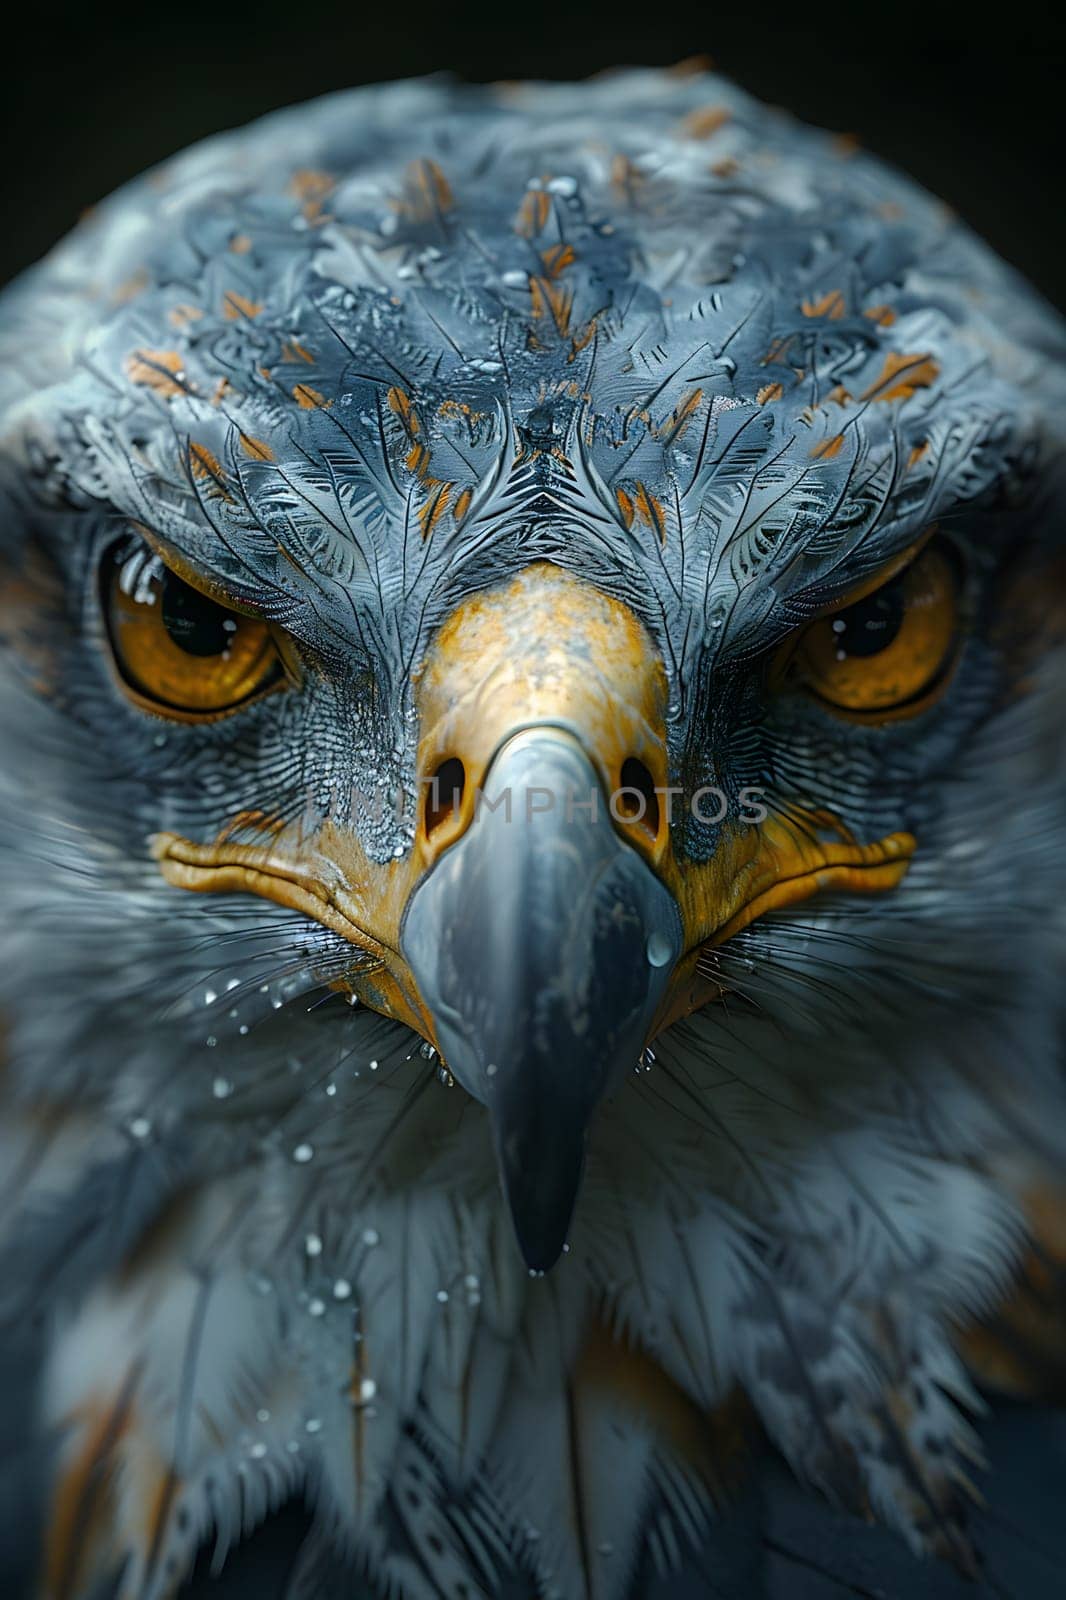 A closeup of a grey Eagles face with water drops on its feathers, showcasing the majestic beauty of this Accipitridae bird of prey